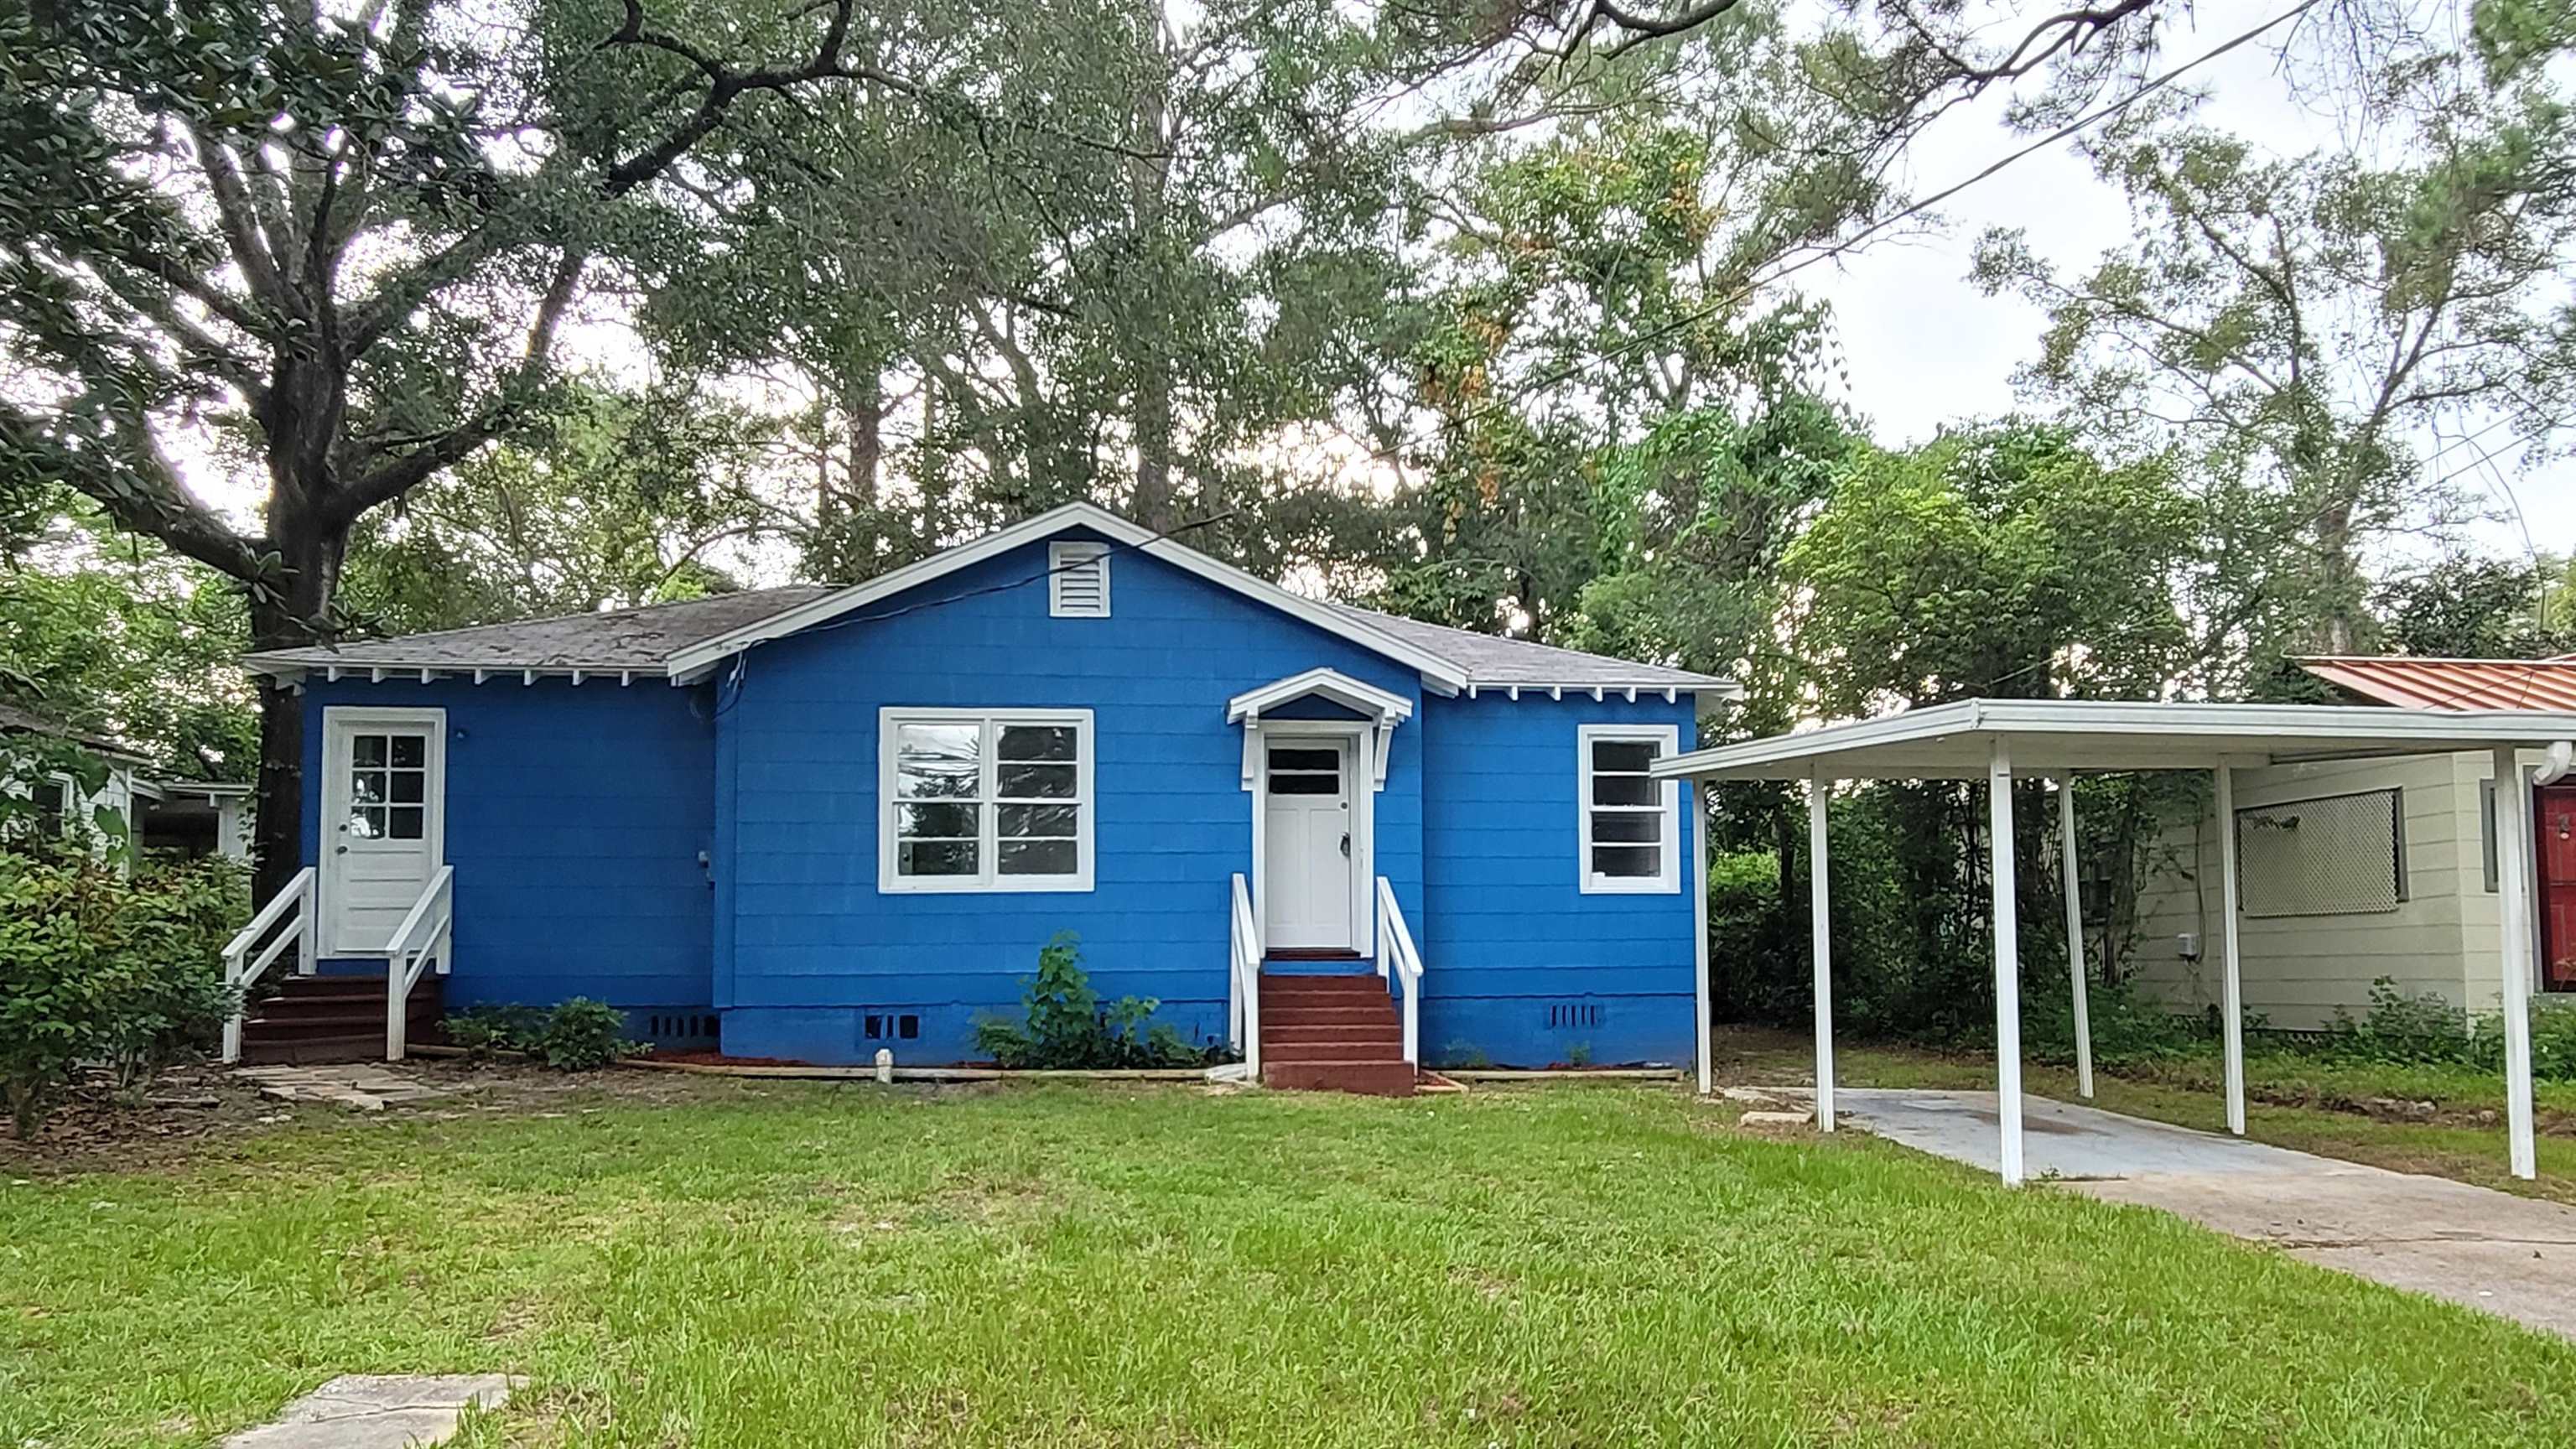 This duplex consists of a 2/1 unit and a 1/1 unit, both vacant and ready to be rented! Great INVESTOR opportunity in the heart of Tallahassee Florida. PGI potential of $25,200 for the year. Property has two separate meters!